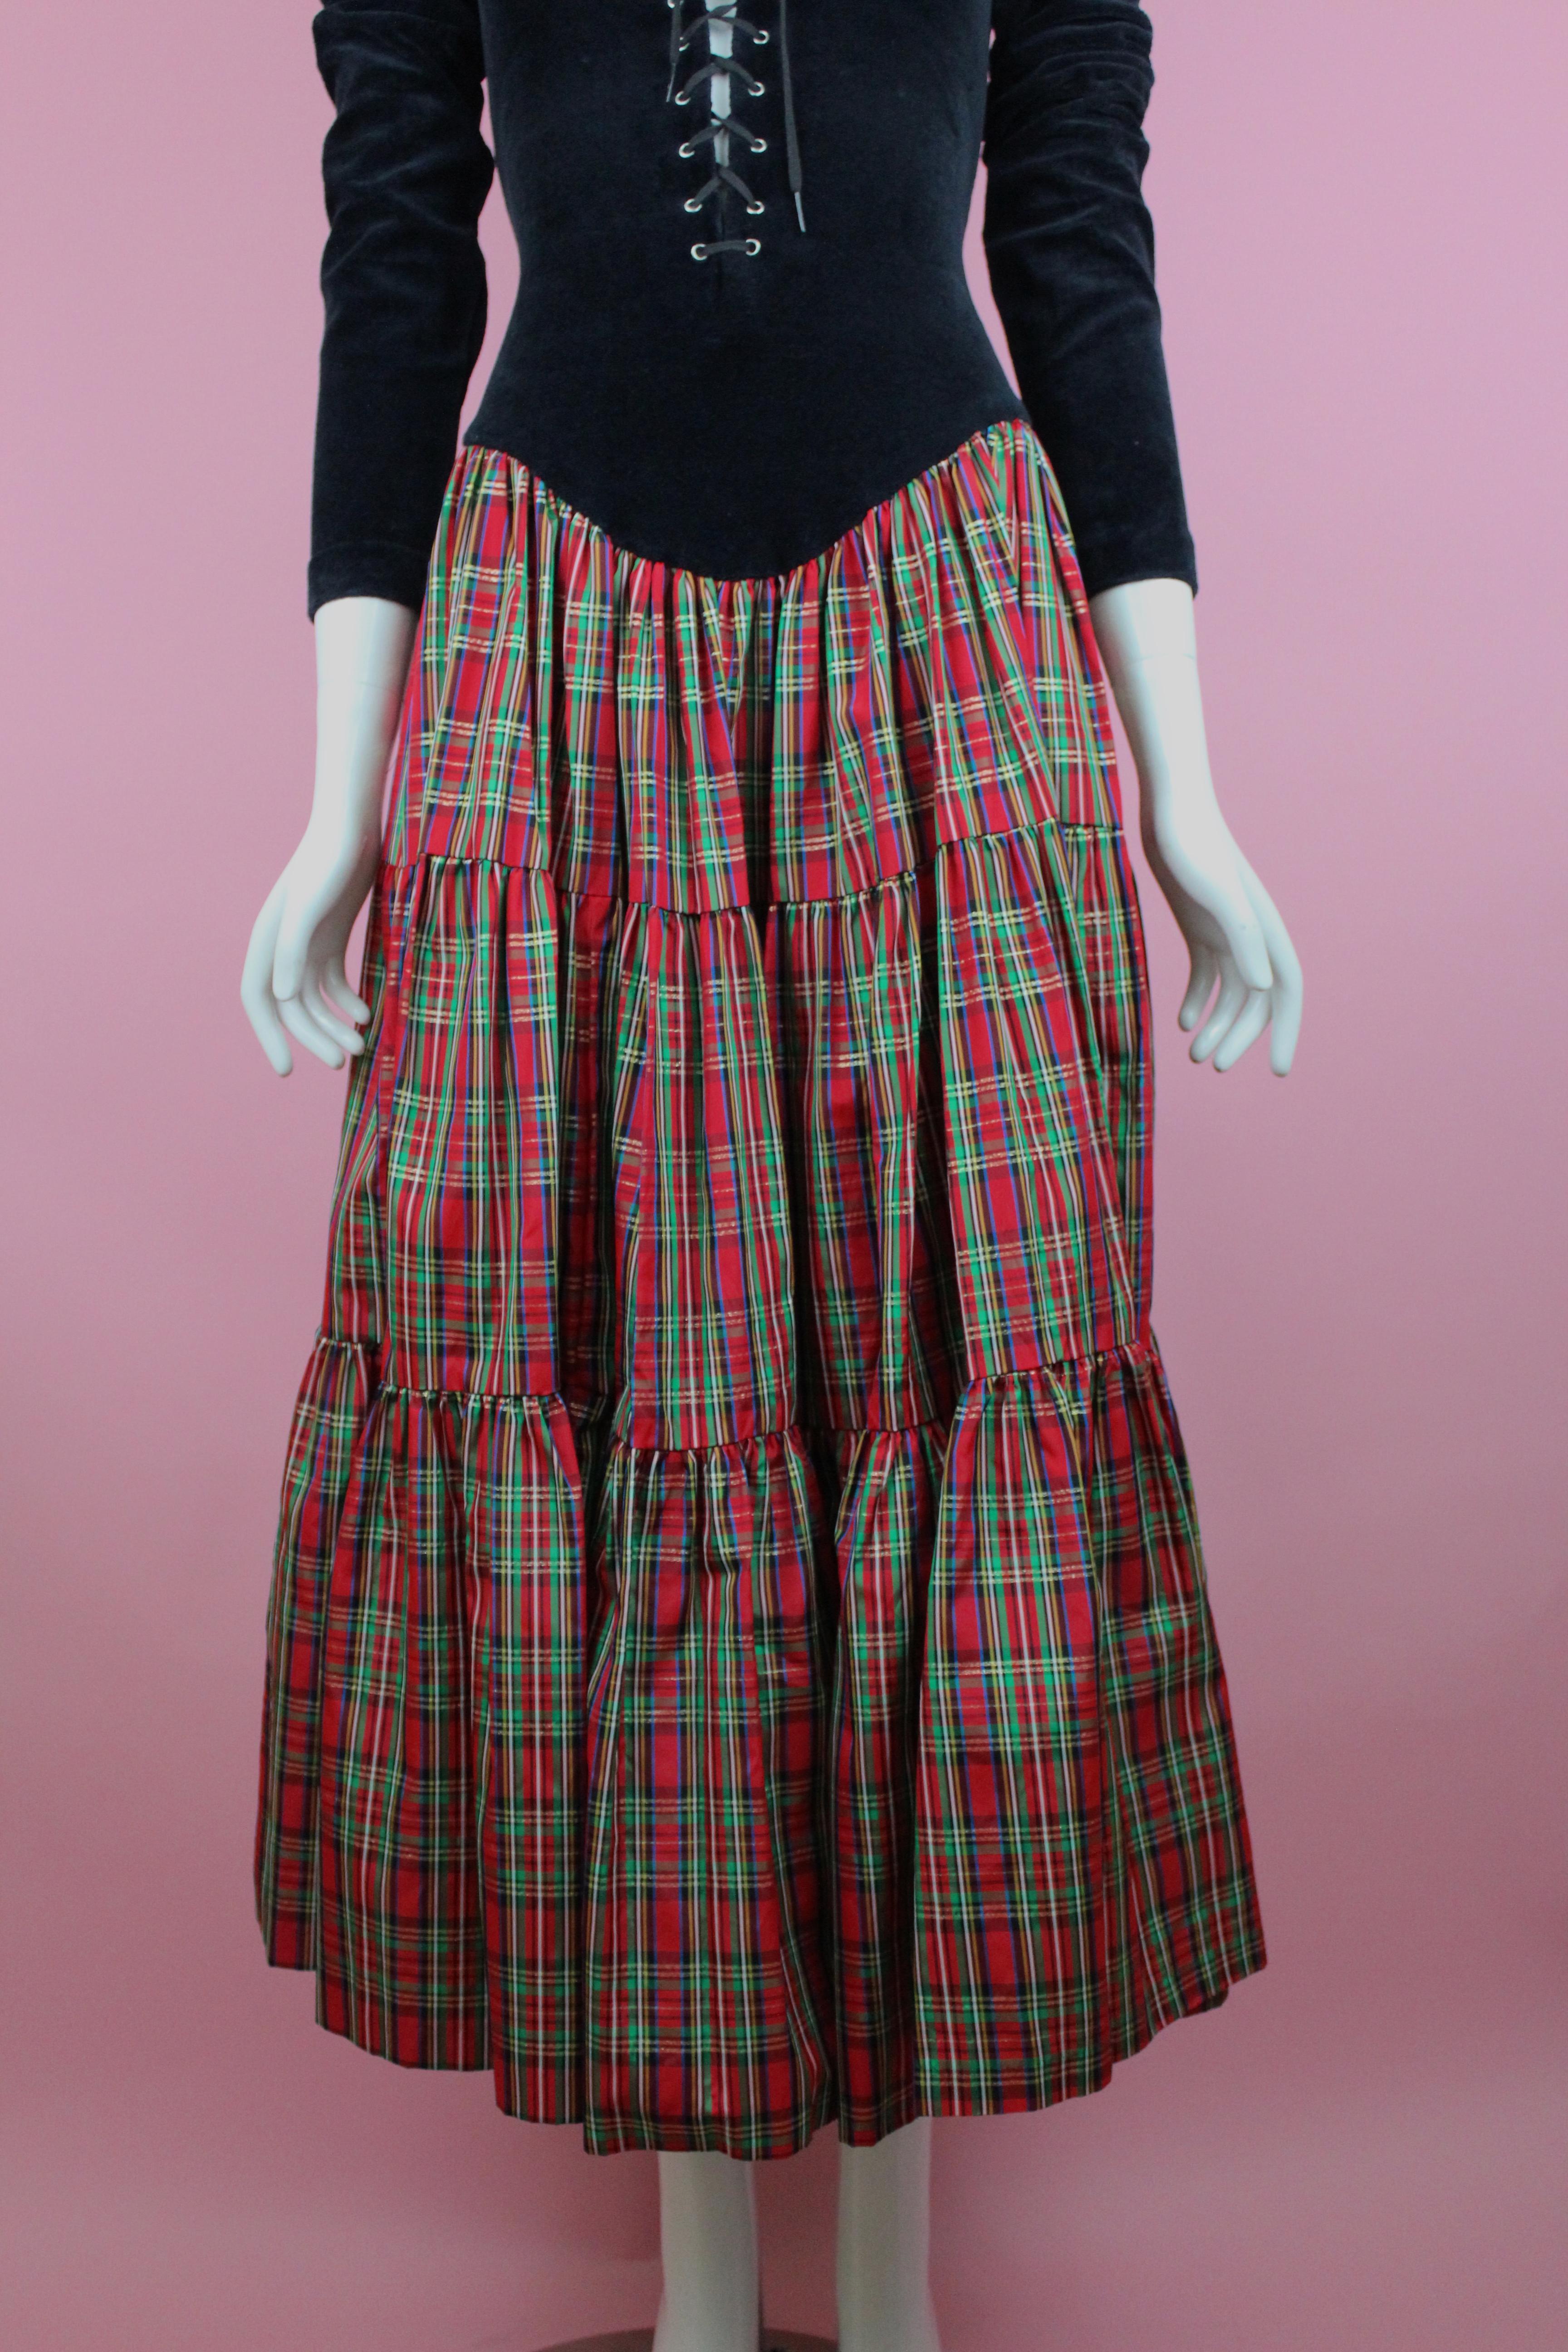 -Betsey Johnson dress with tartan skirt detail, laces at the torso
-Dress reaches to mid-calf 
-Shows 80's label 
-Sized 4-6 
-Made in the USA

Approximate Measurement 
-Total length: 49